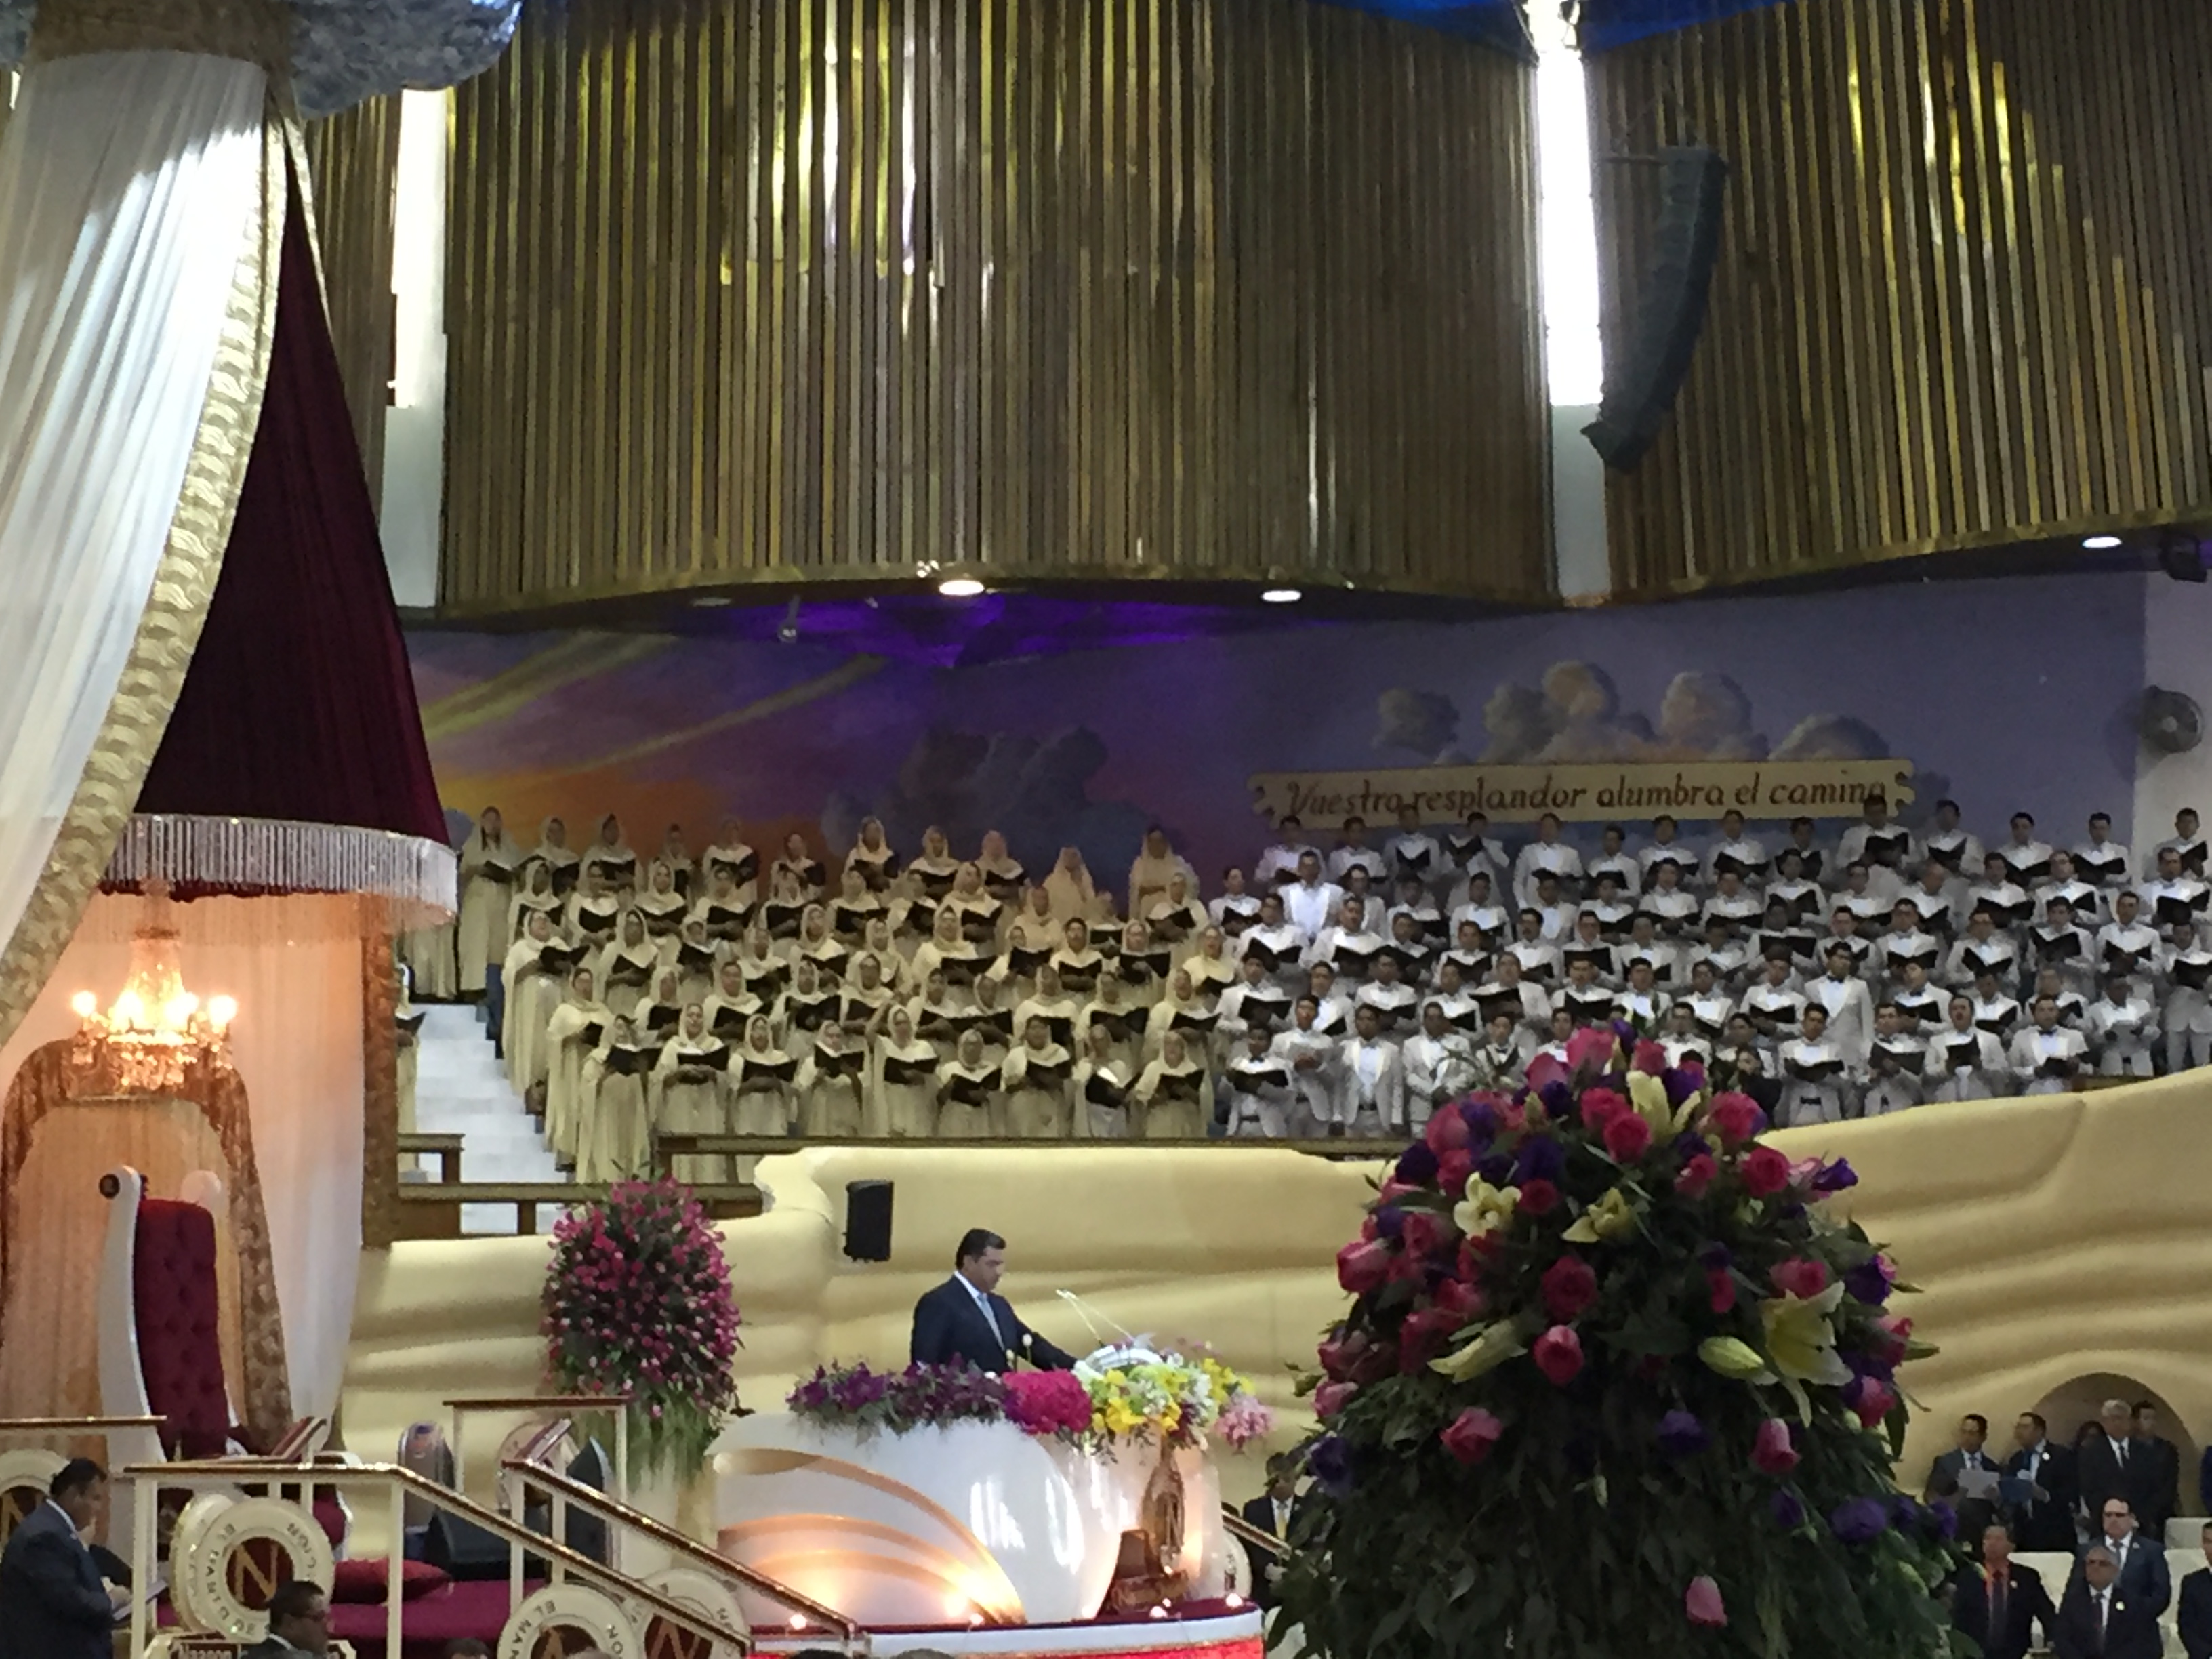 The Apostle speaks inside the temple